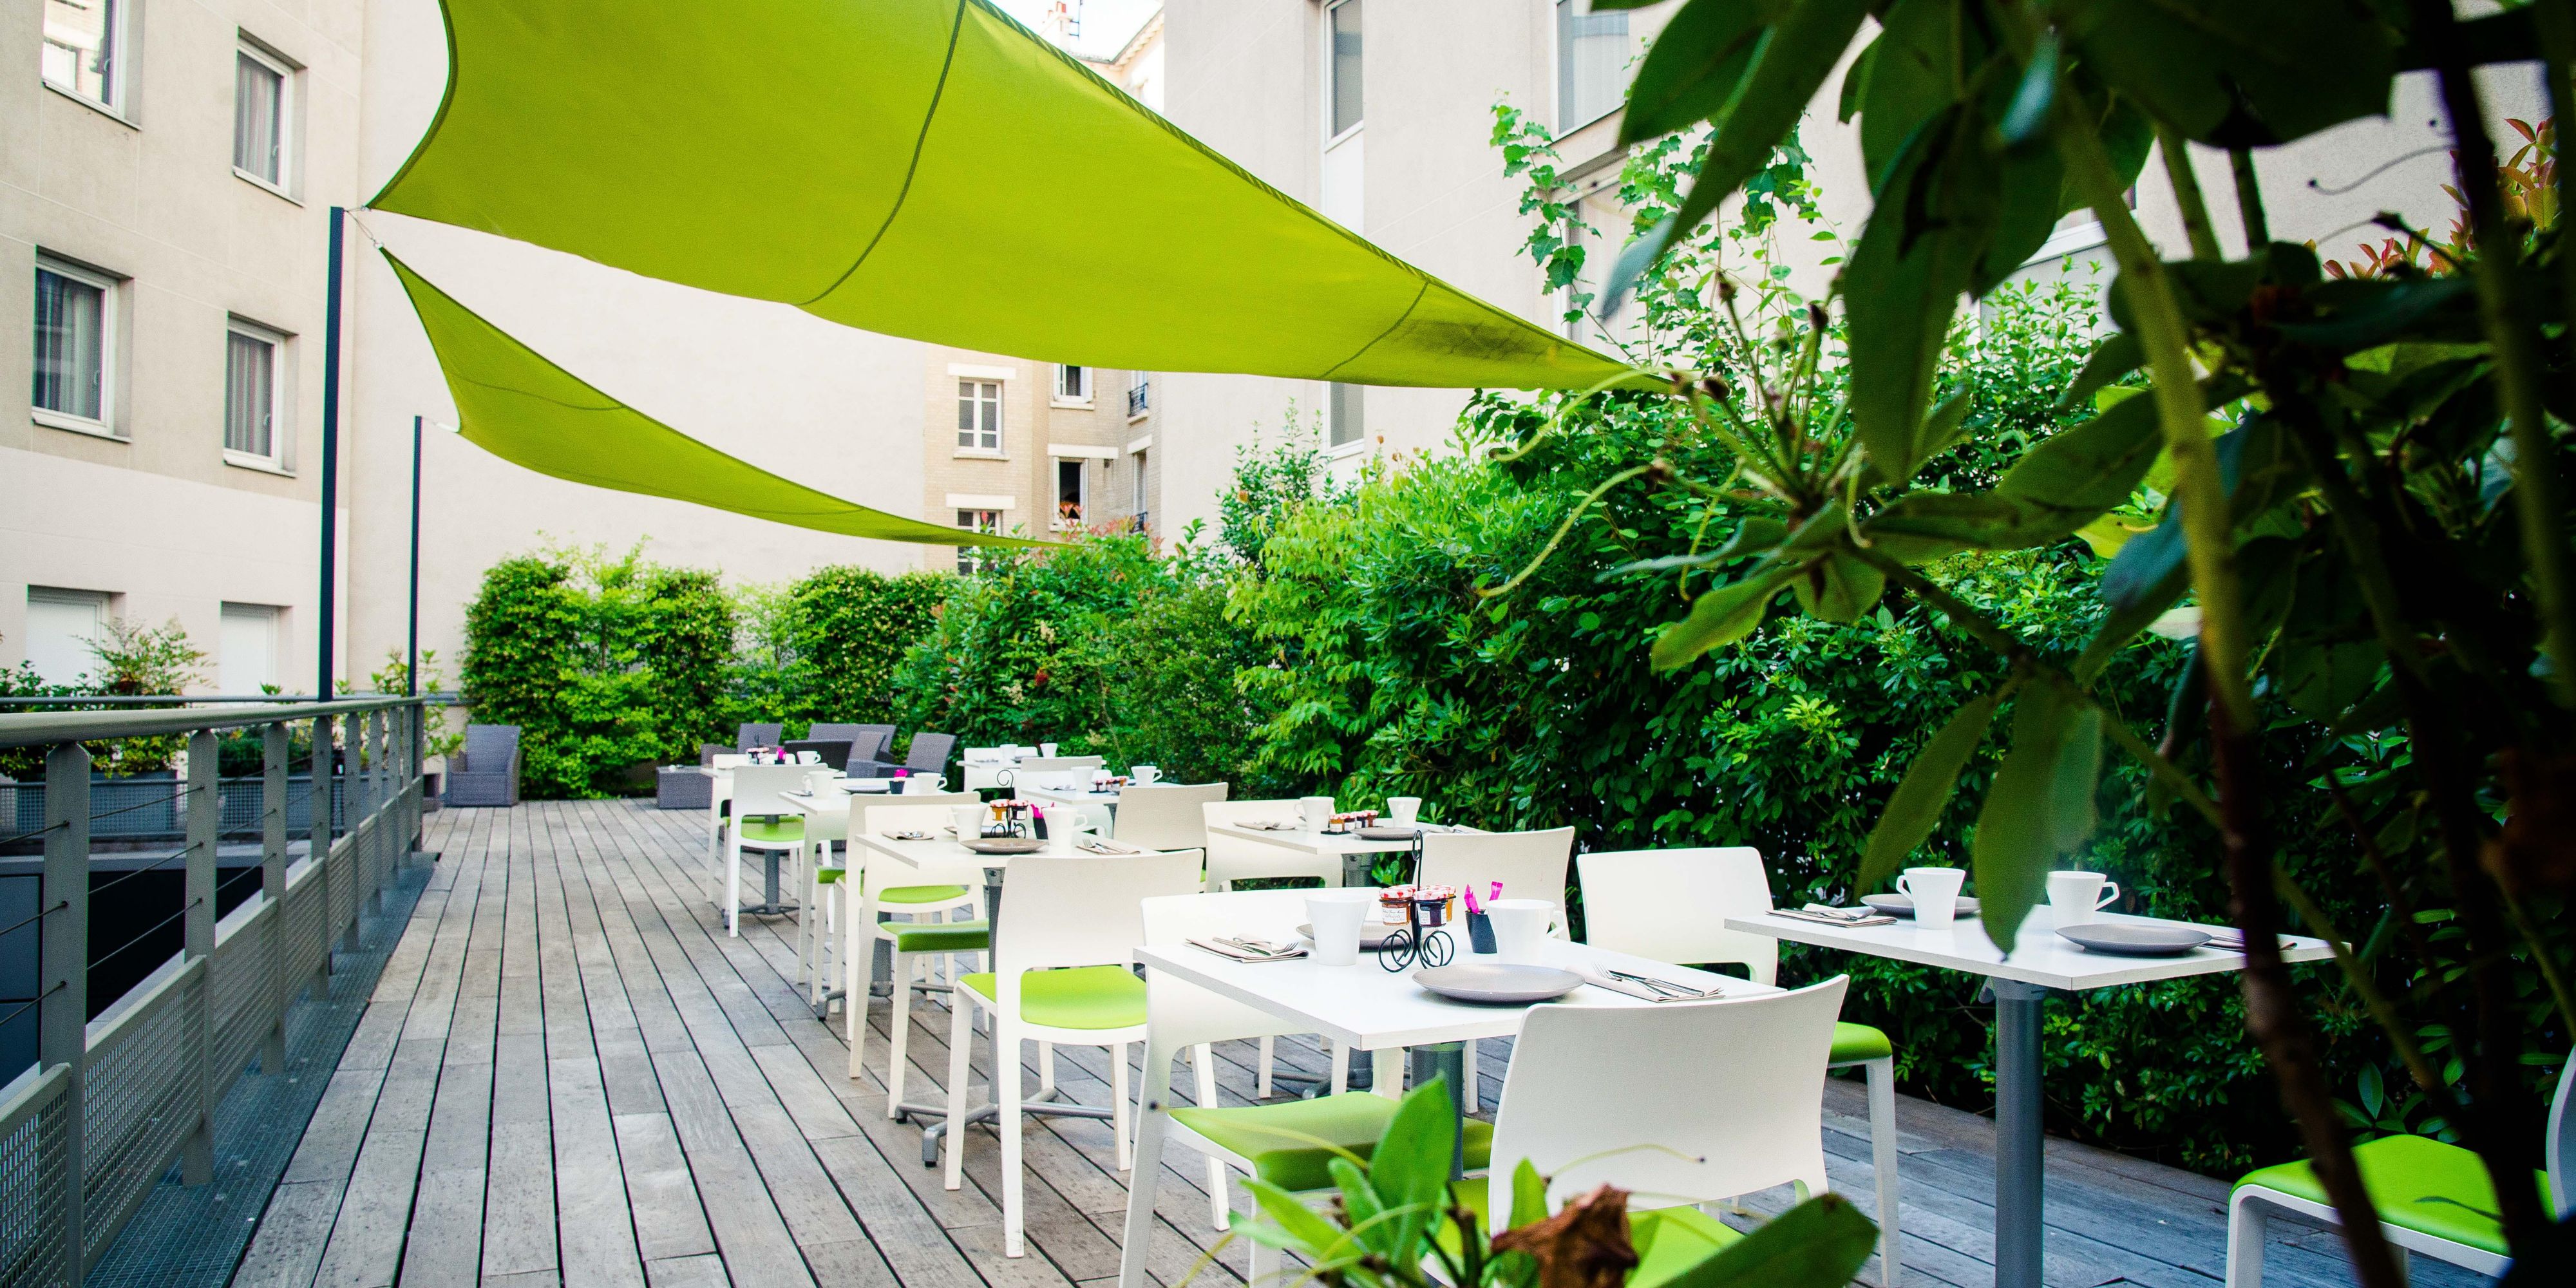 Wasabi, our conservatory of 140sqm, is a small pieve of heaven in the middle of our hotel and offers a peaceful terrace of 120sqm. You will be able to appreciate a unique and unforgettable moment full of surprises.